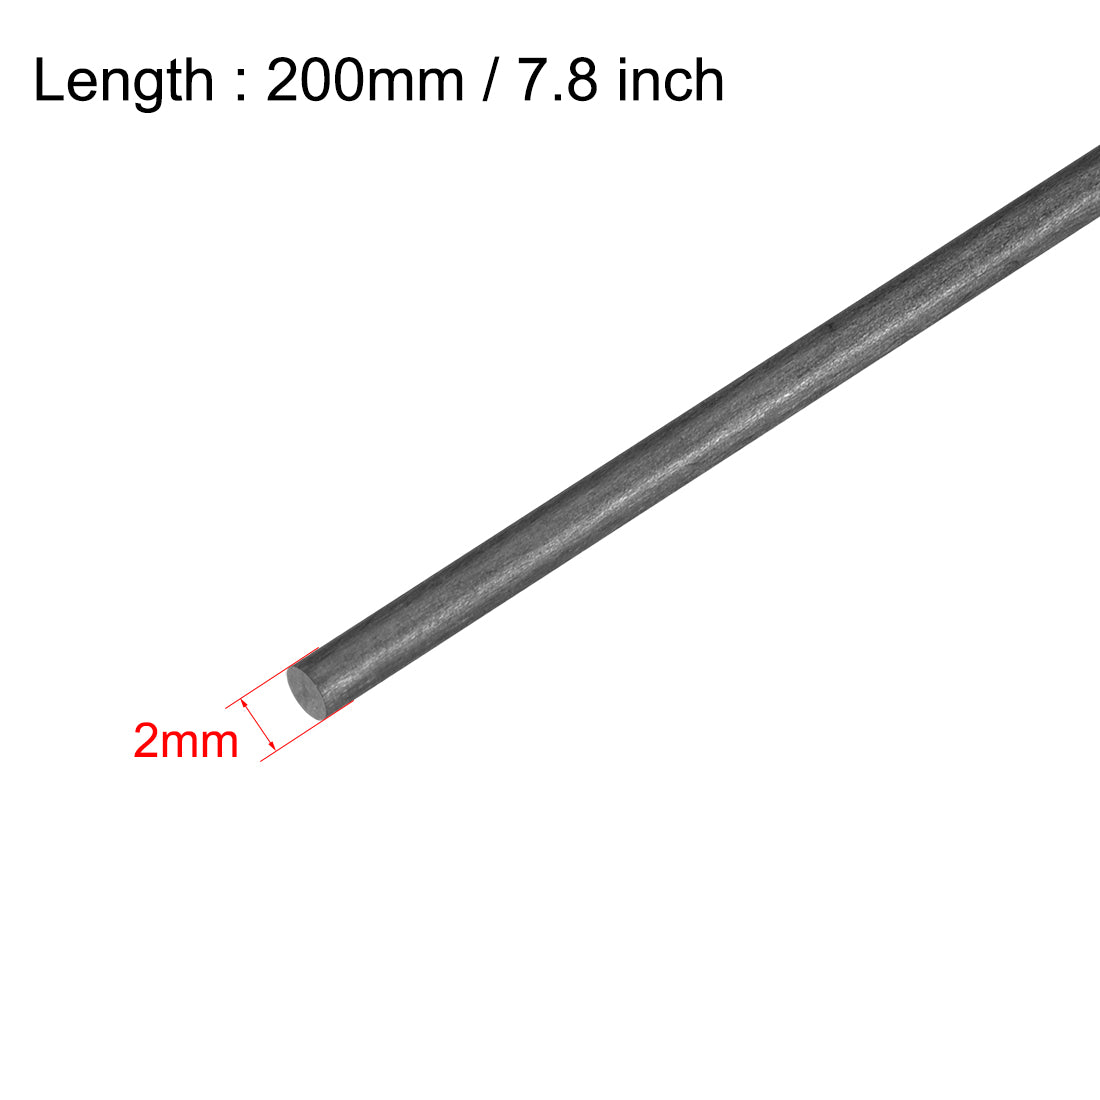 Uxcell Uxcell 3mm Carbon Fiber Rod For RC Airplane Matte Pole US, 200mm 7.8 inch, 10pcs